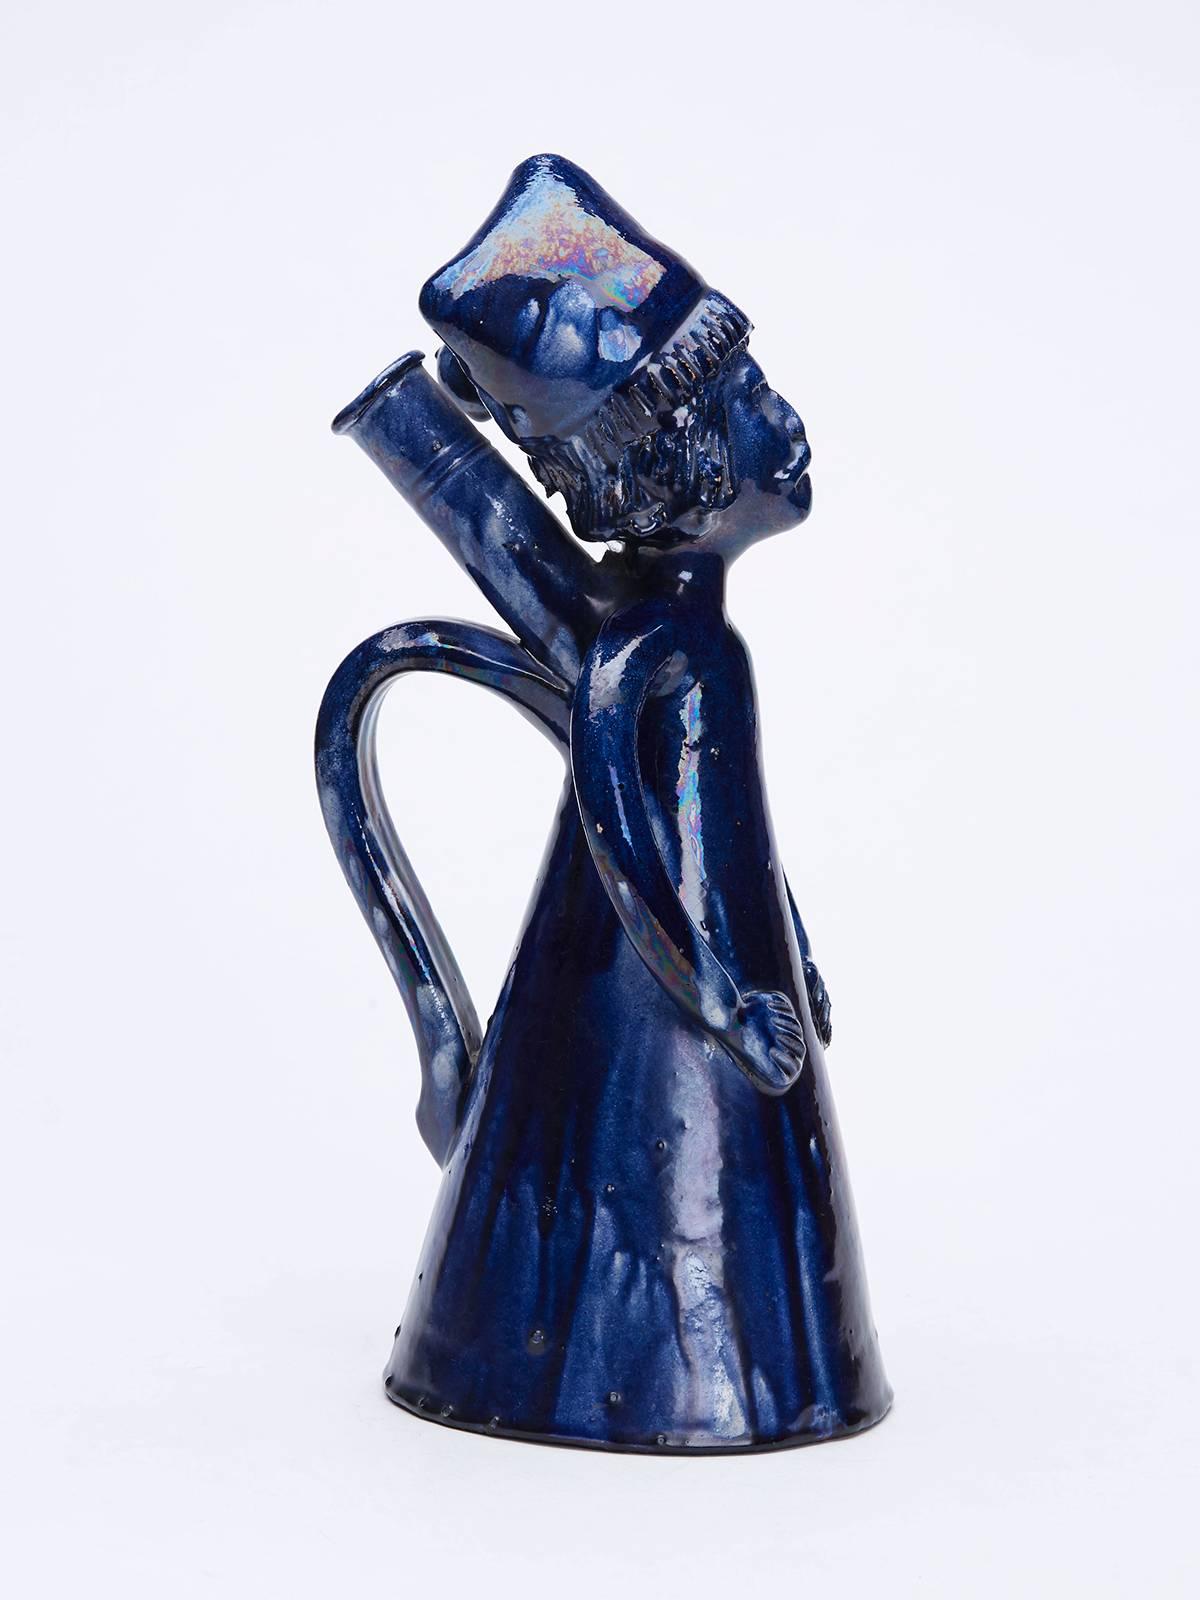 An antique folk art blue glazed redware pottery pottery jug or flask modelled as a man wears a night gown and night cap with a spout behind the man’s head with a carrying handle below and with the arms resting on either side of the body and forming